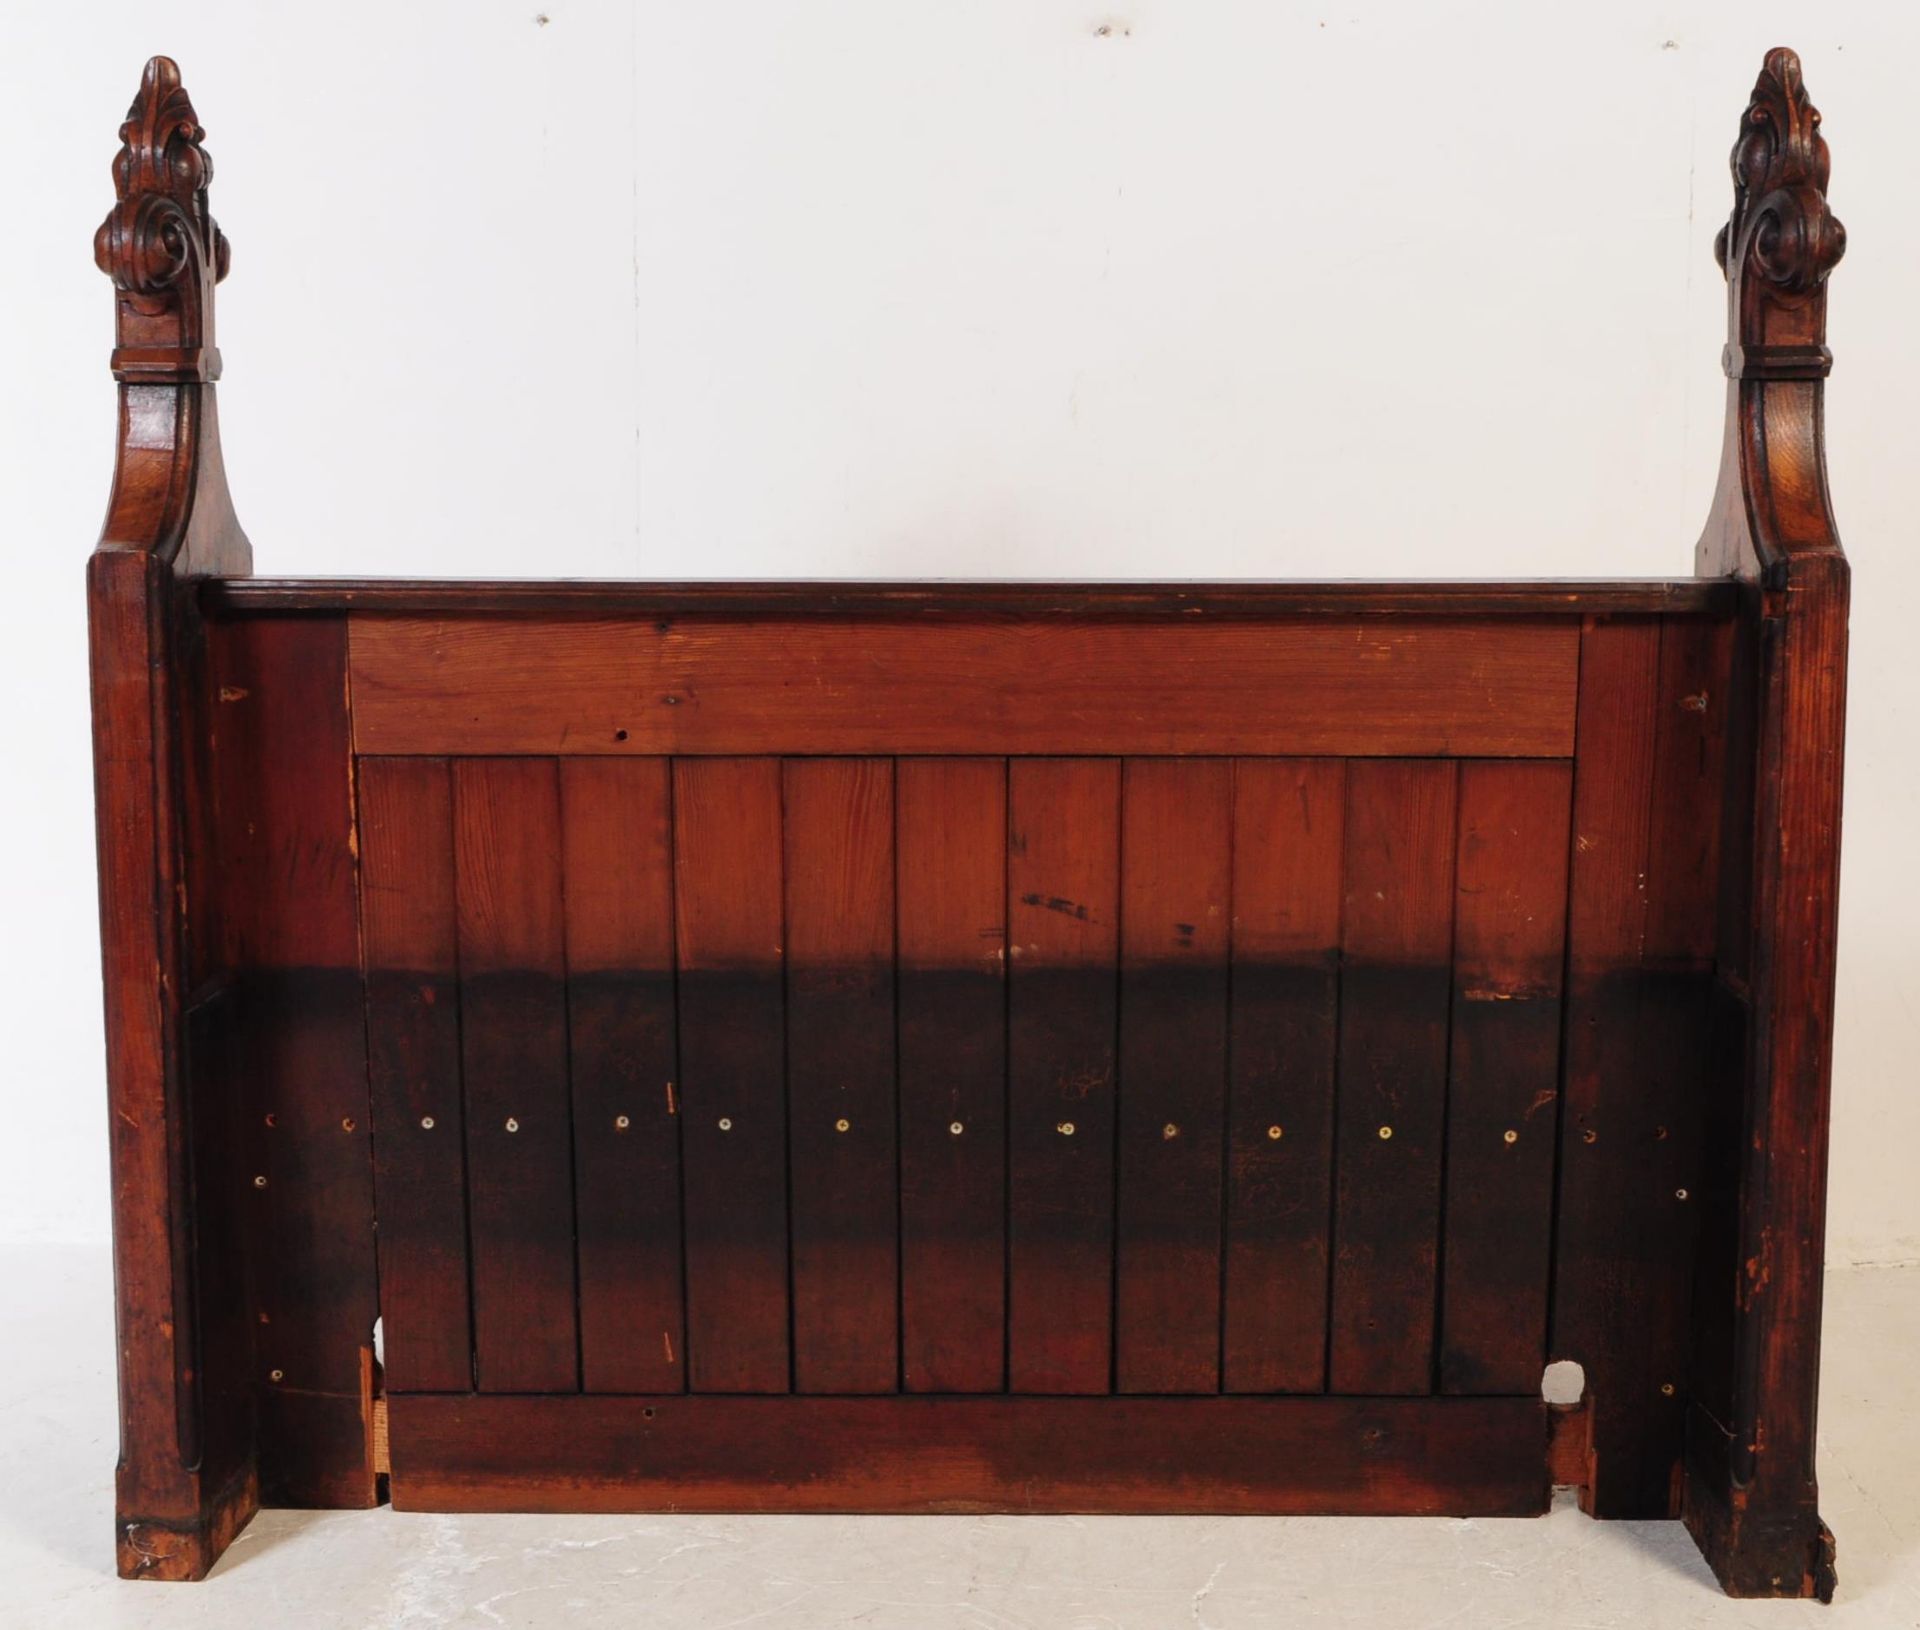 VICTORIAN 19TH CENTURY OAK ECCLESIASTICAL GOTHIC BENCH - Image 6 of 8